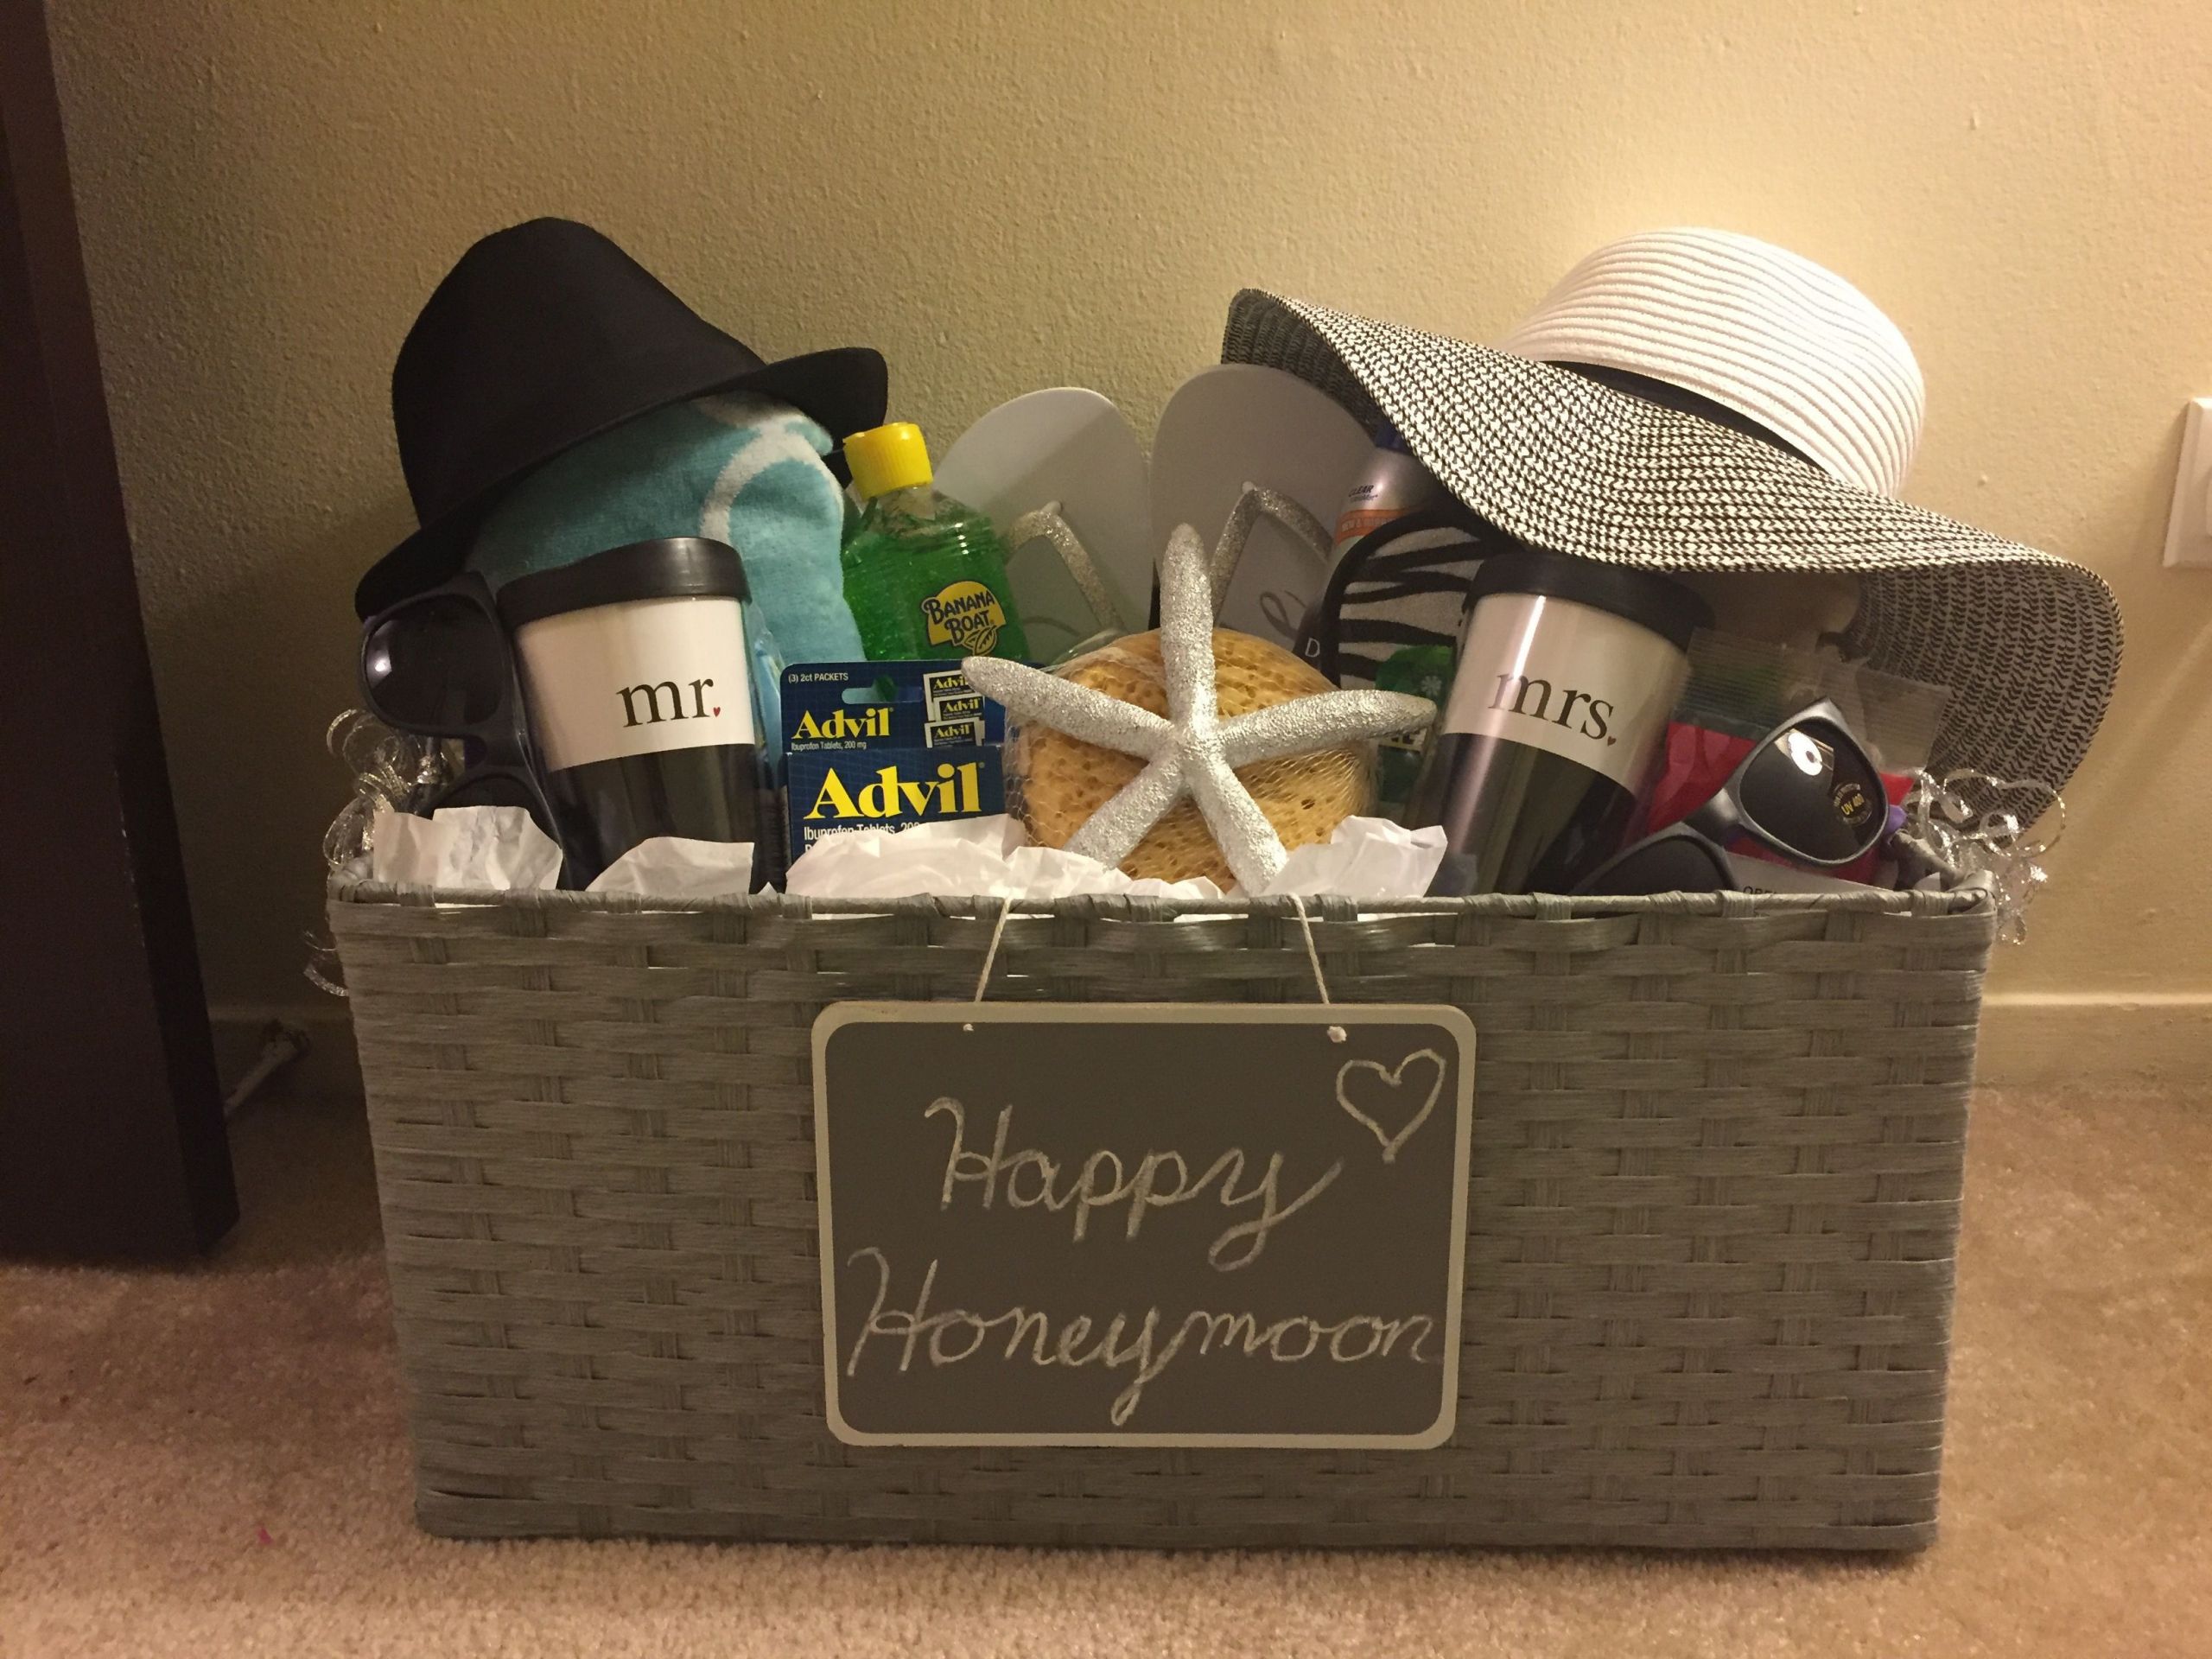 Top 22 Wedding Gift Basket Ideas for Bride and Groom - Home, Family